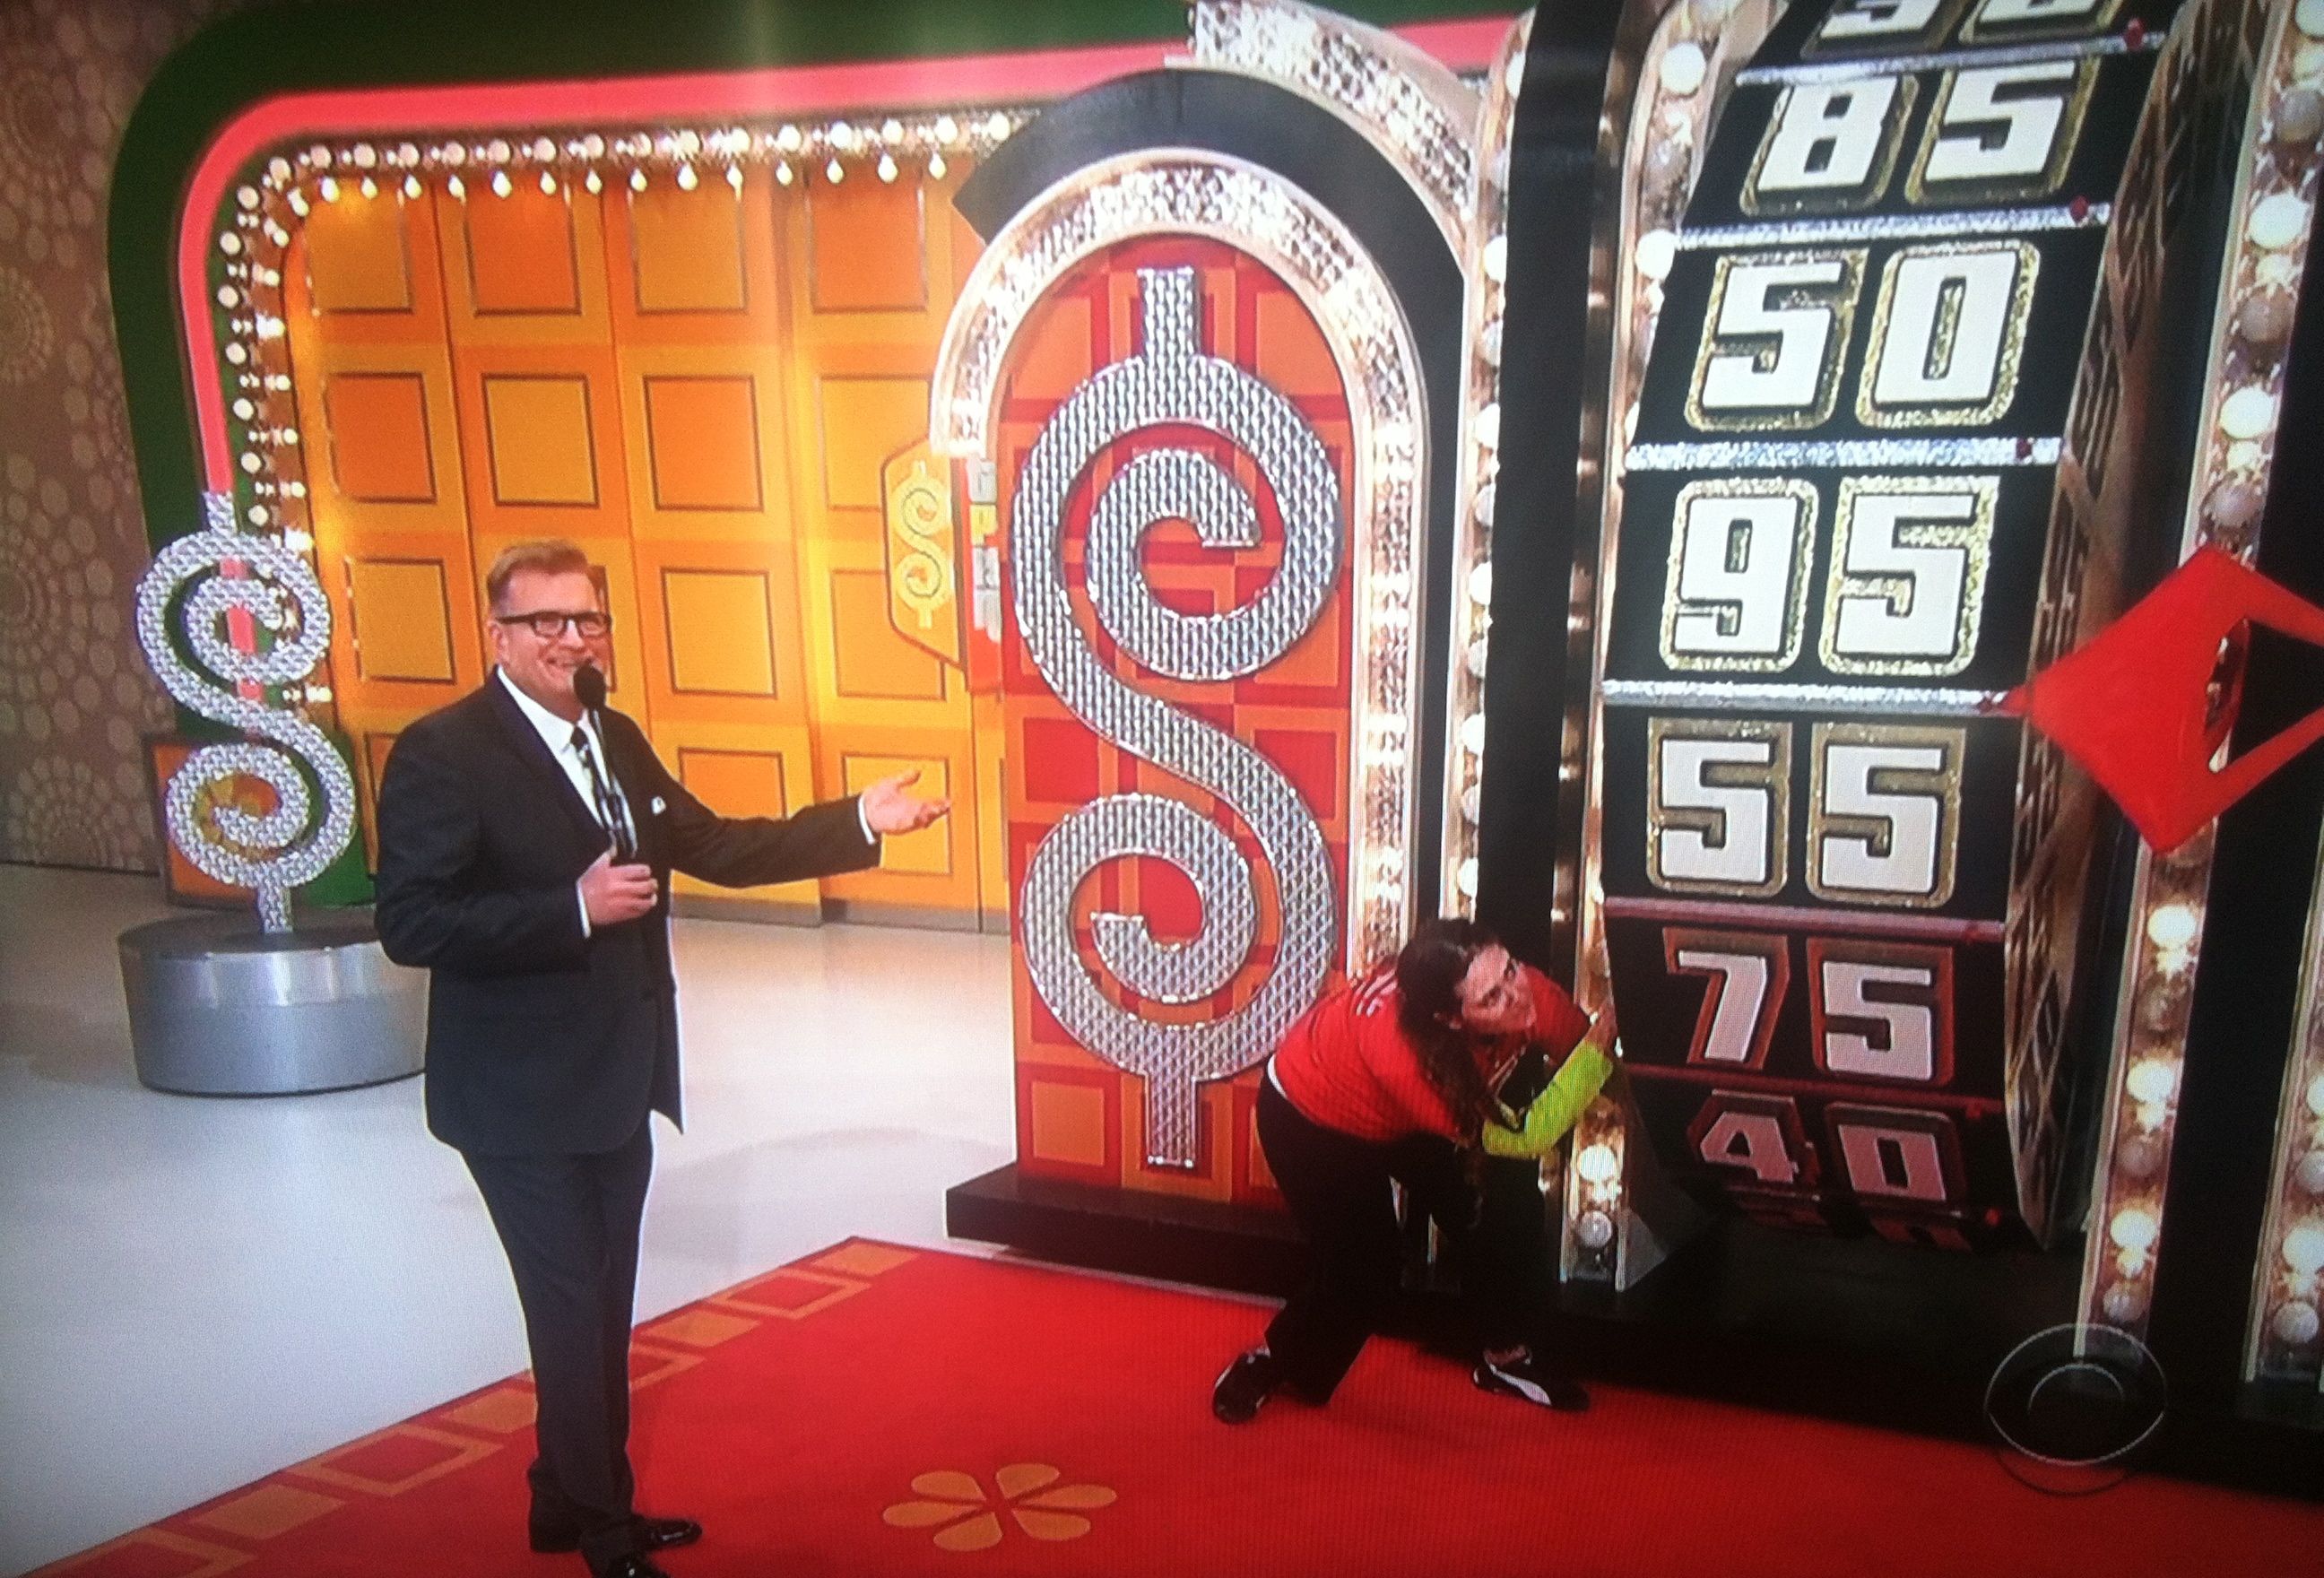 Aurora De Lucia down low, getting momentum on The Price is Right wheel as Drew Carey talks.